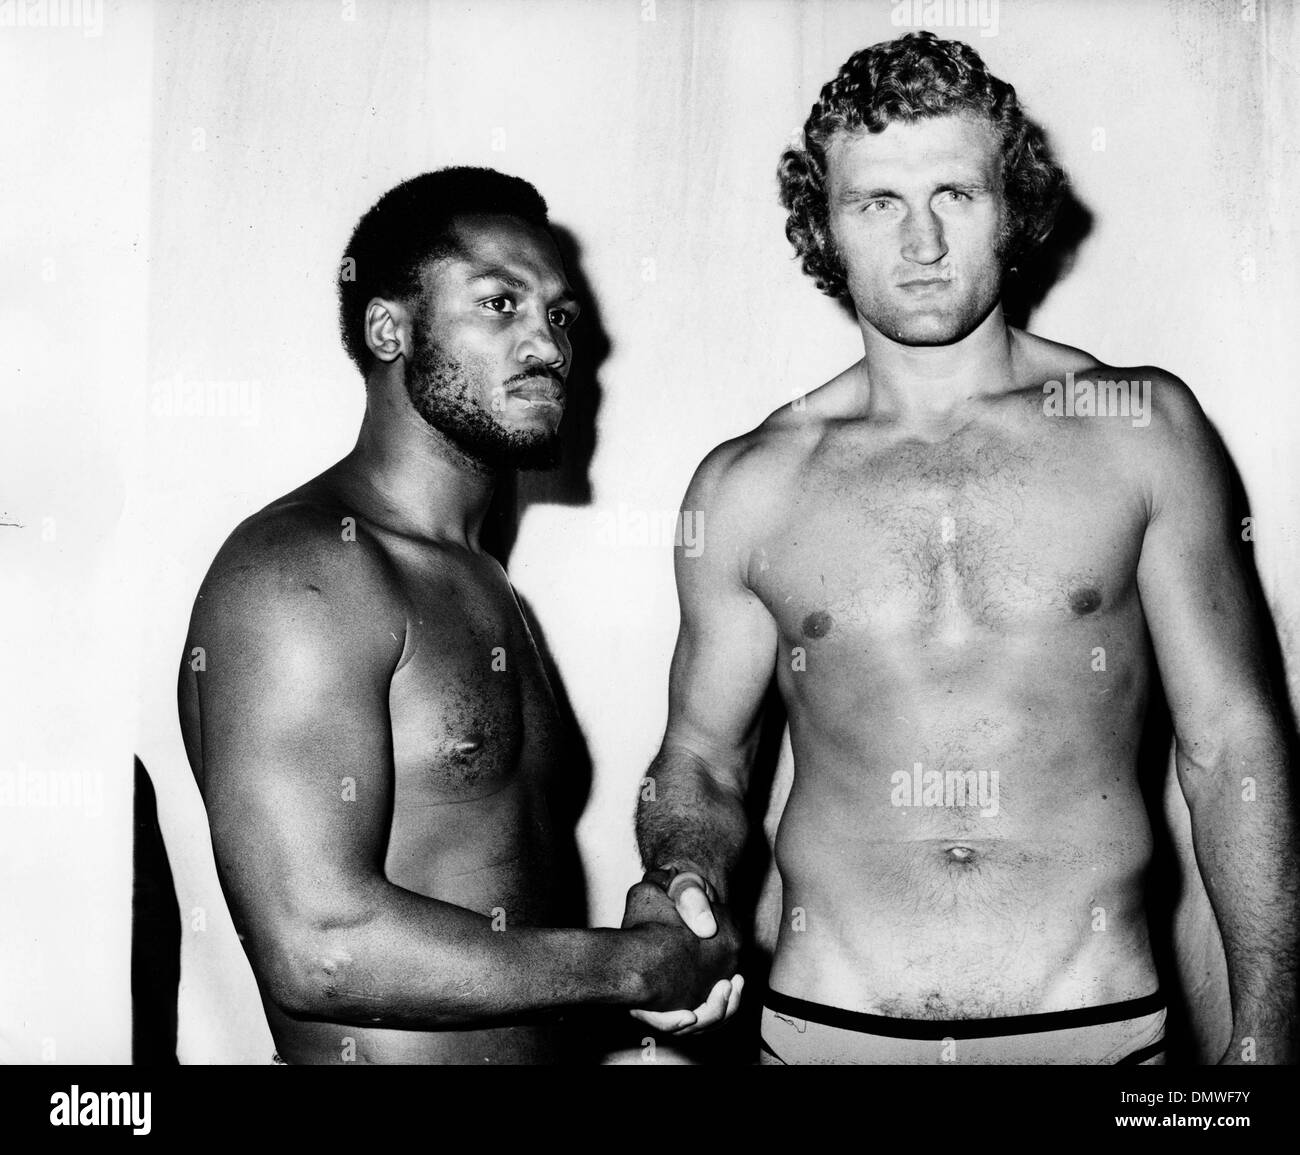 Boxer 'Smokin' Joe Frazier died after a battle with liver cancer. Joseph William 'Joe' Frazier (January 12, 1944 - November 7, 2011) was a former Olympic and Undisputed World Heavyweight boxing champion, whose professional career lasted from 1965 to 1976, with a brief comeback in 1981. Frazier defeated Ali on points in the highly anticipated 'Fight of the Century'. The Internationa Stock Photo